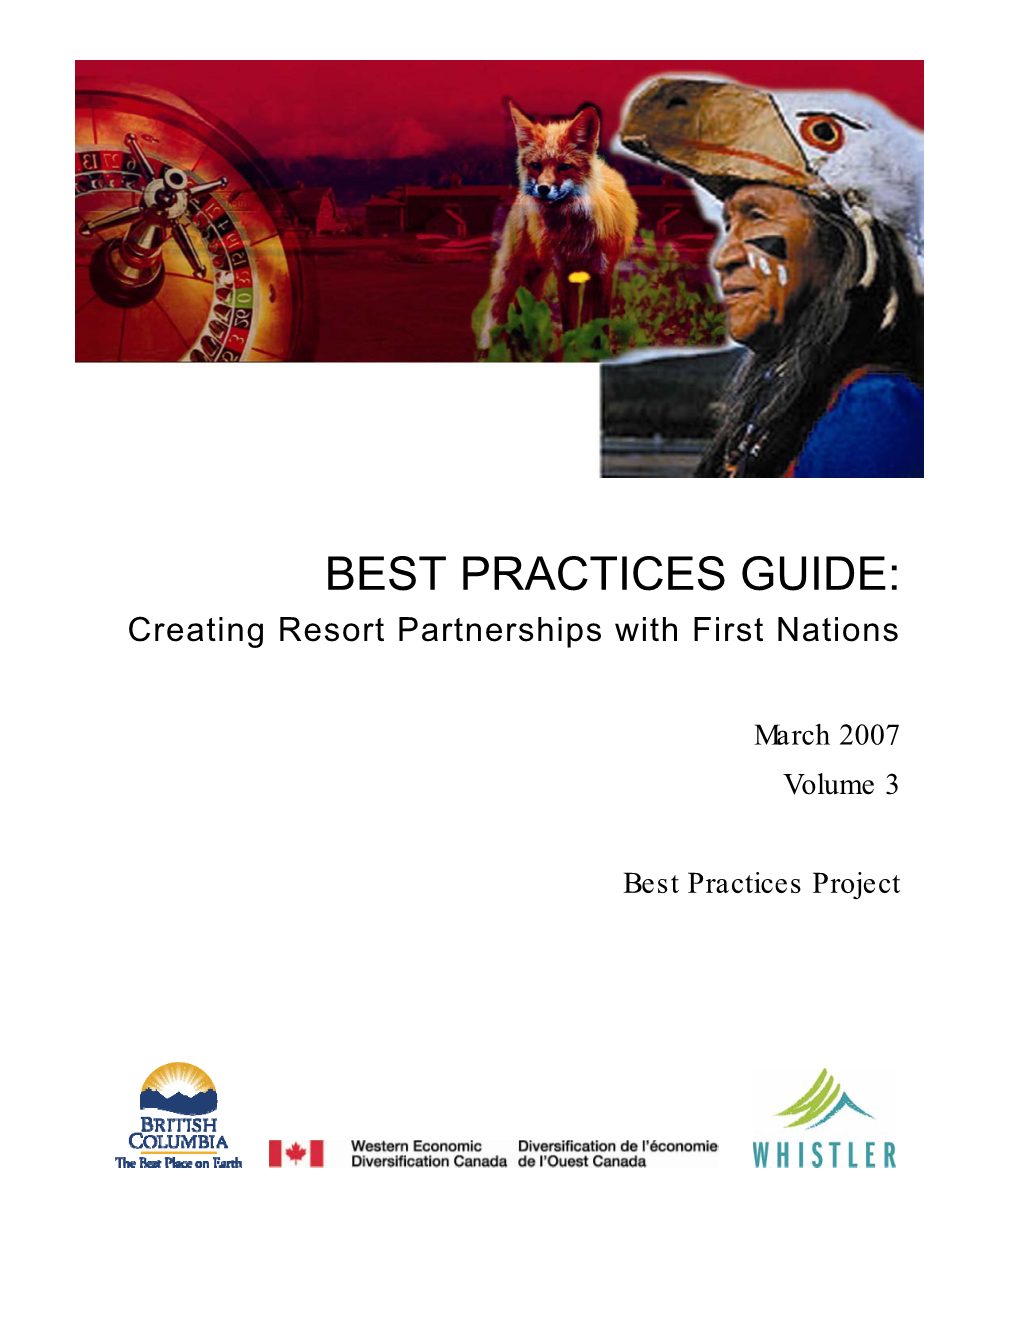 BEST PRACTICES GUIDE: Creating Resort Partnerships with First Nations